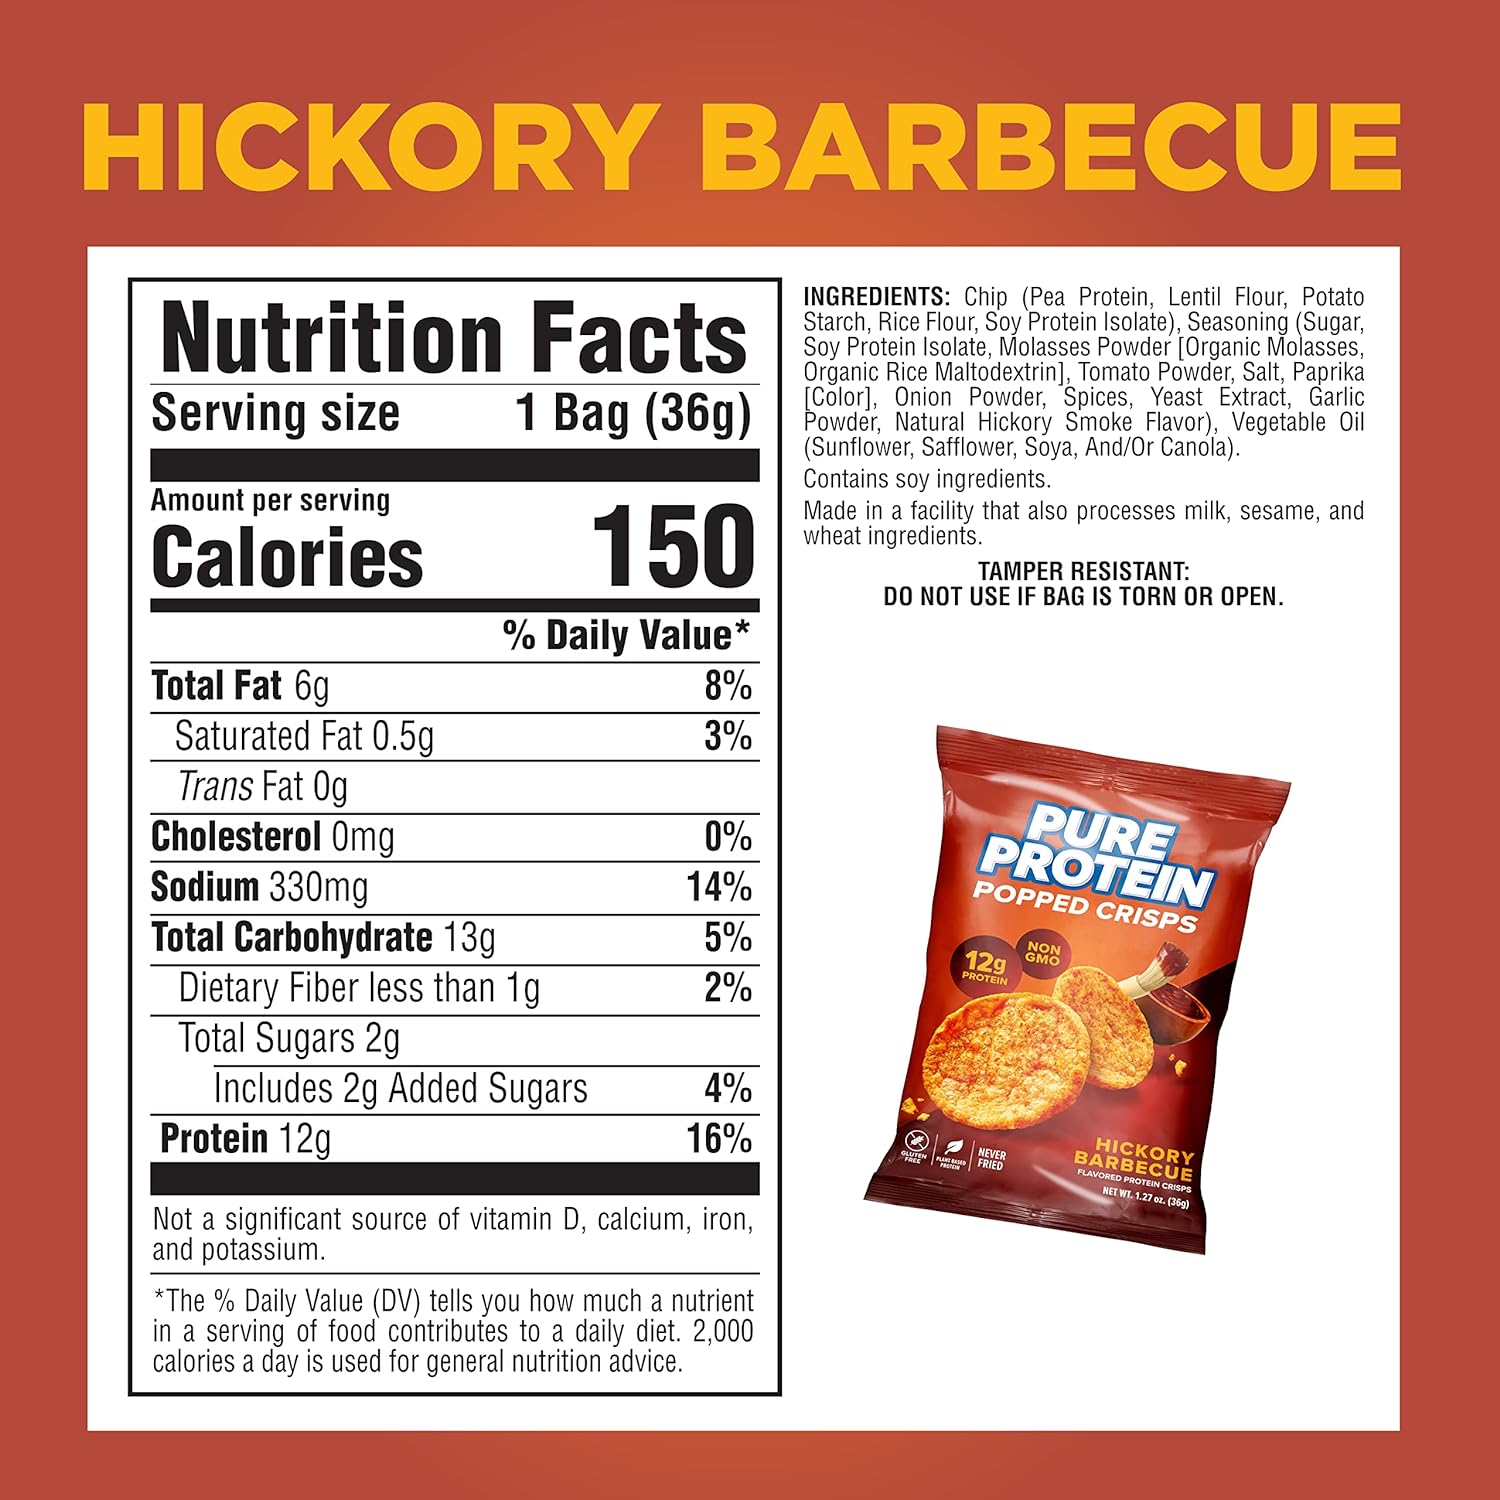 #Flavor_Hickory Barbecue